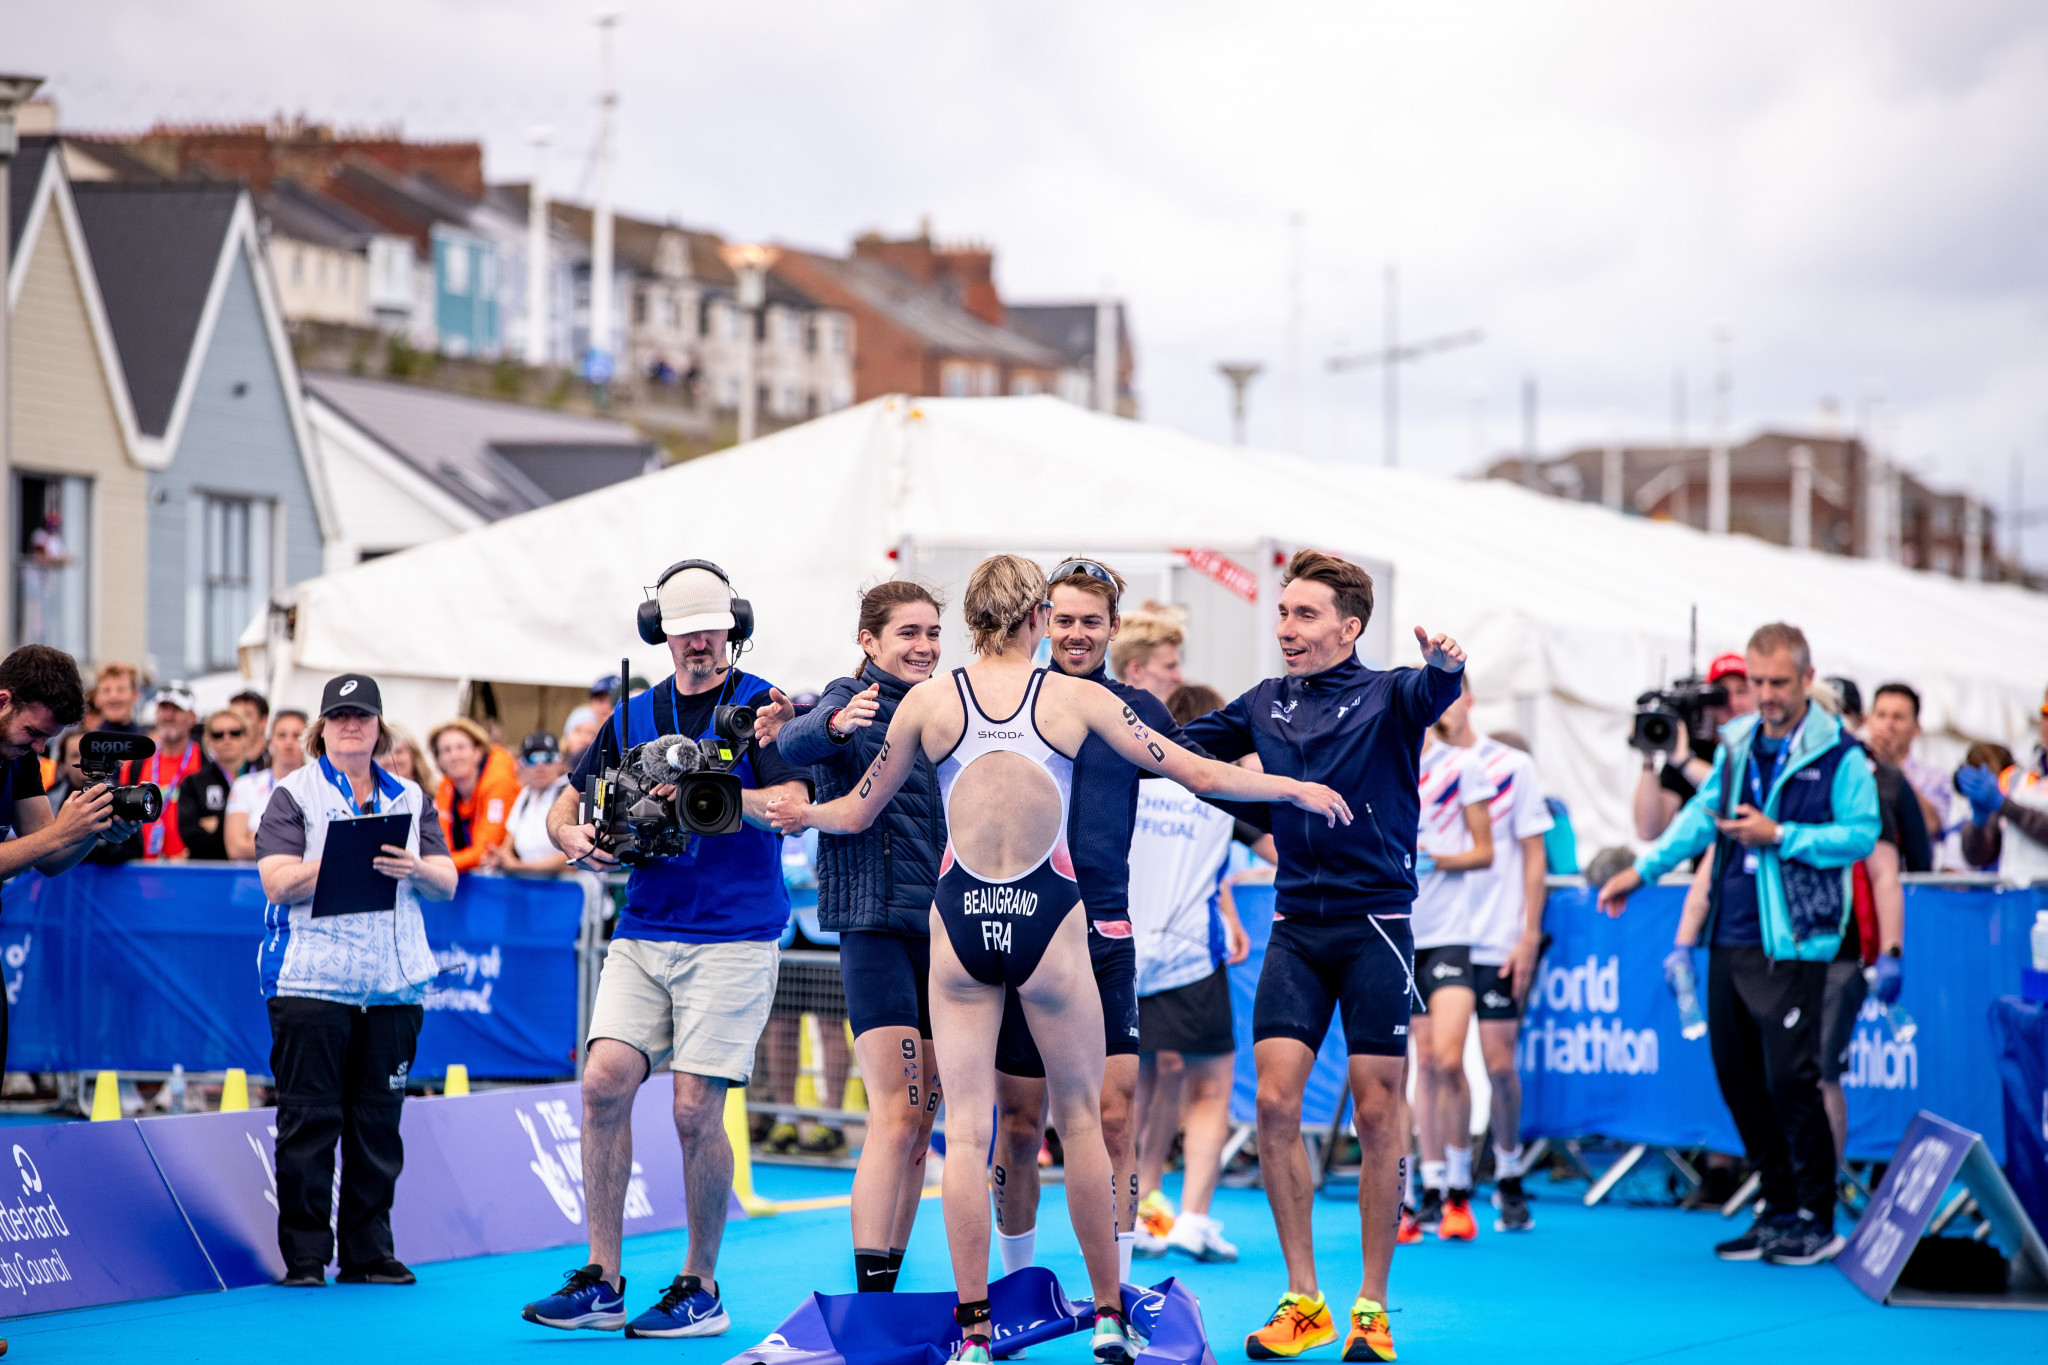 France completed a clean sweep of elite golds at the World Triathlon Championship Series in Sunderland with a mixed relay victory ©World Triathlon